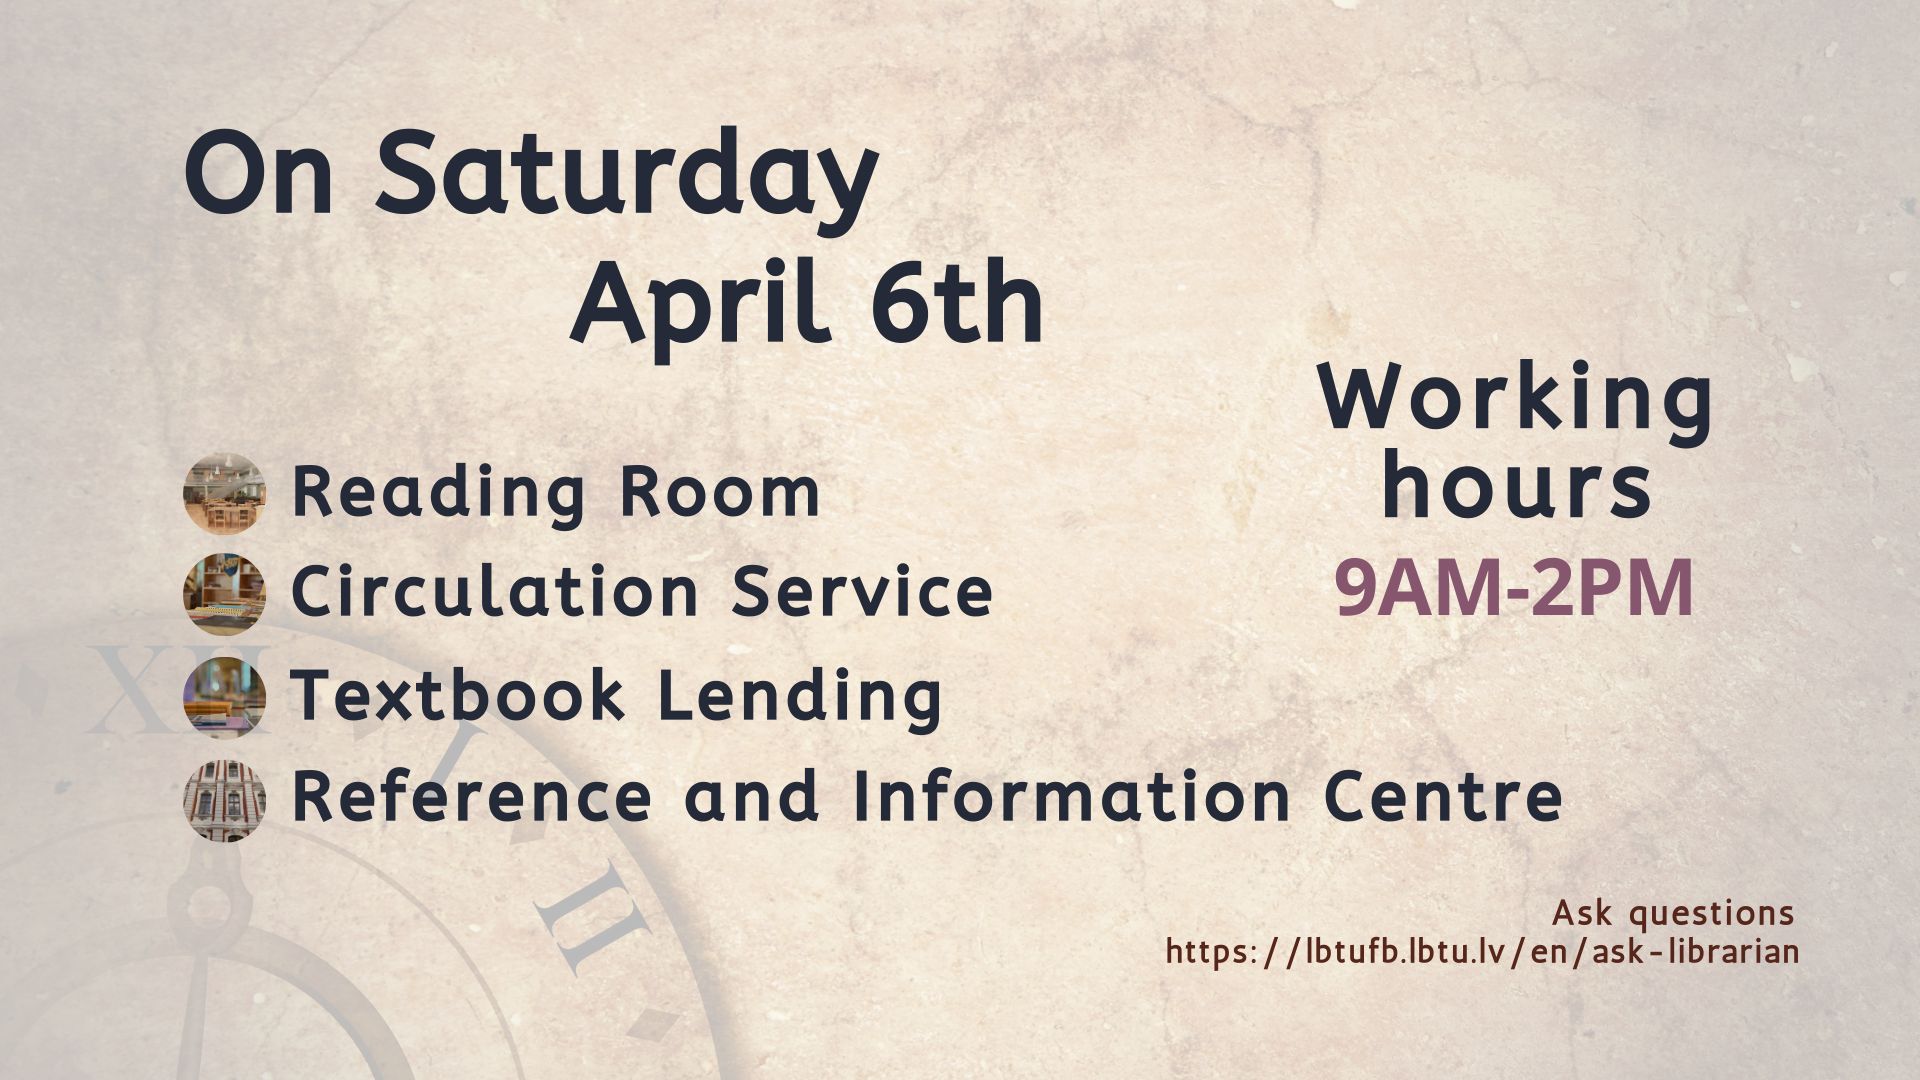 On Saturday, April 6th, library is open from 9am until 2pm